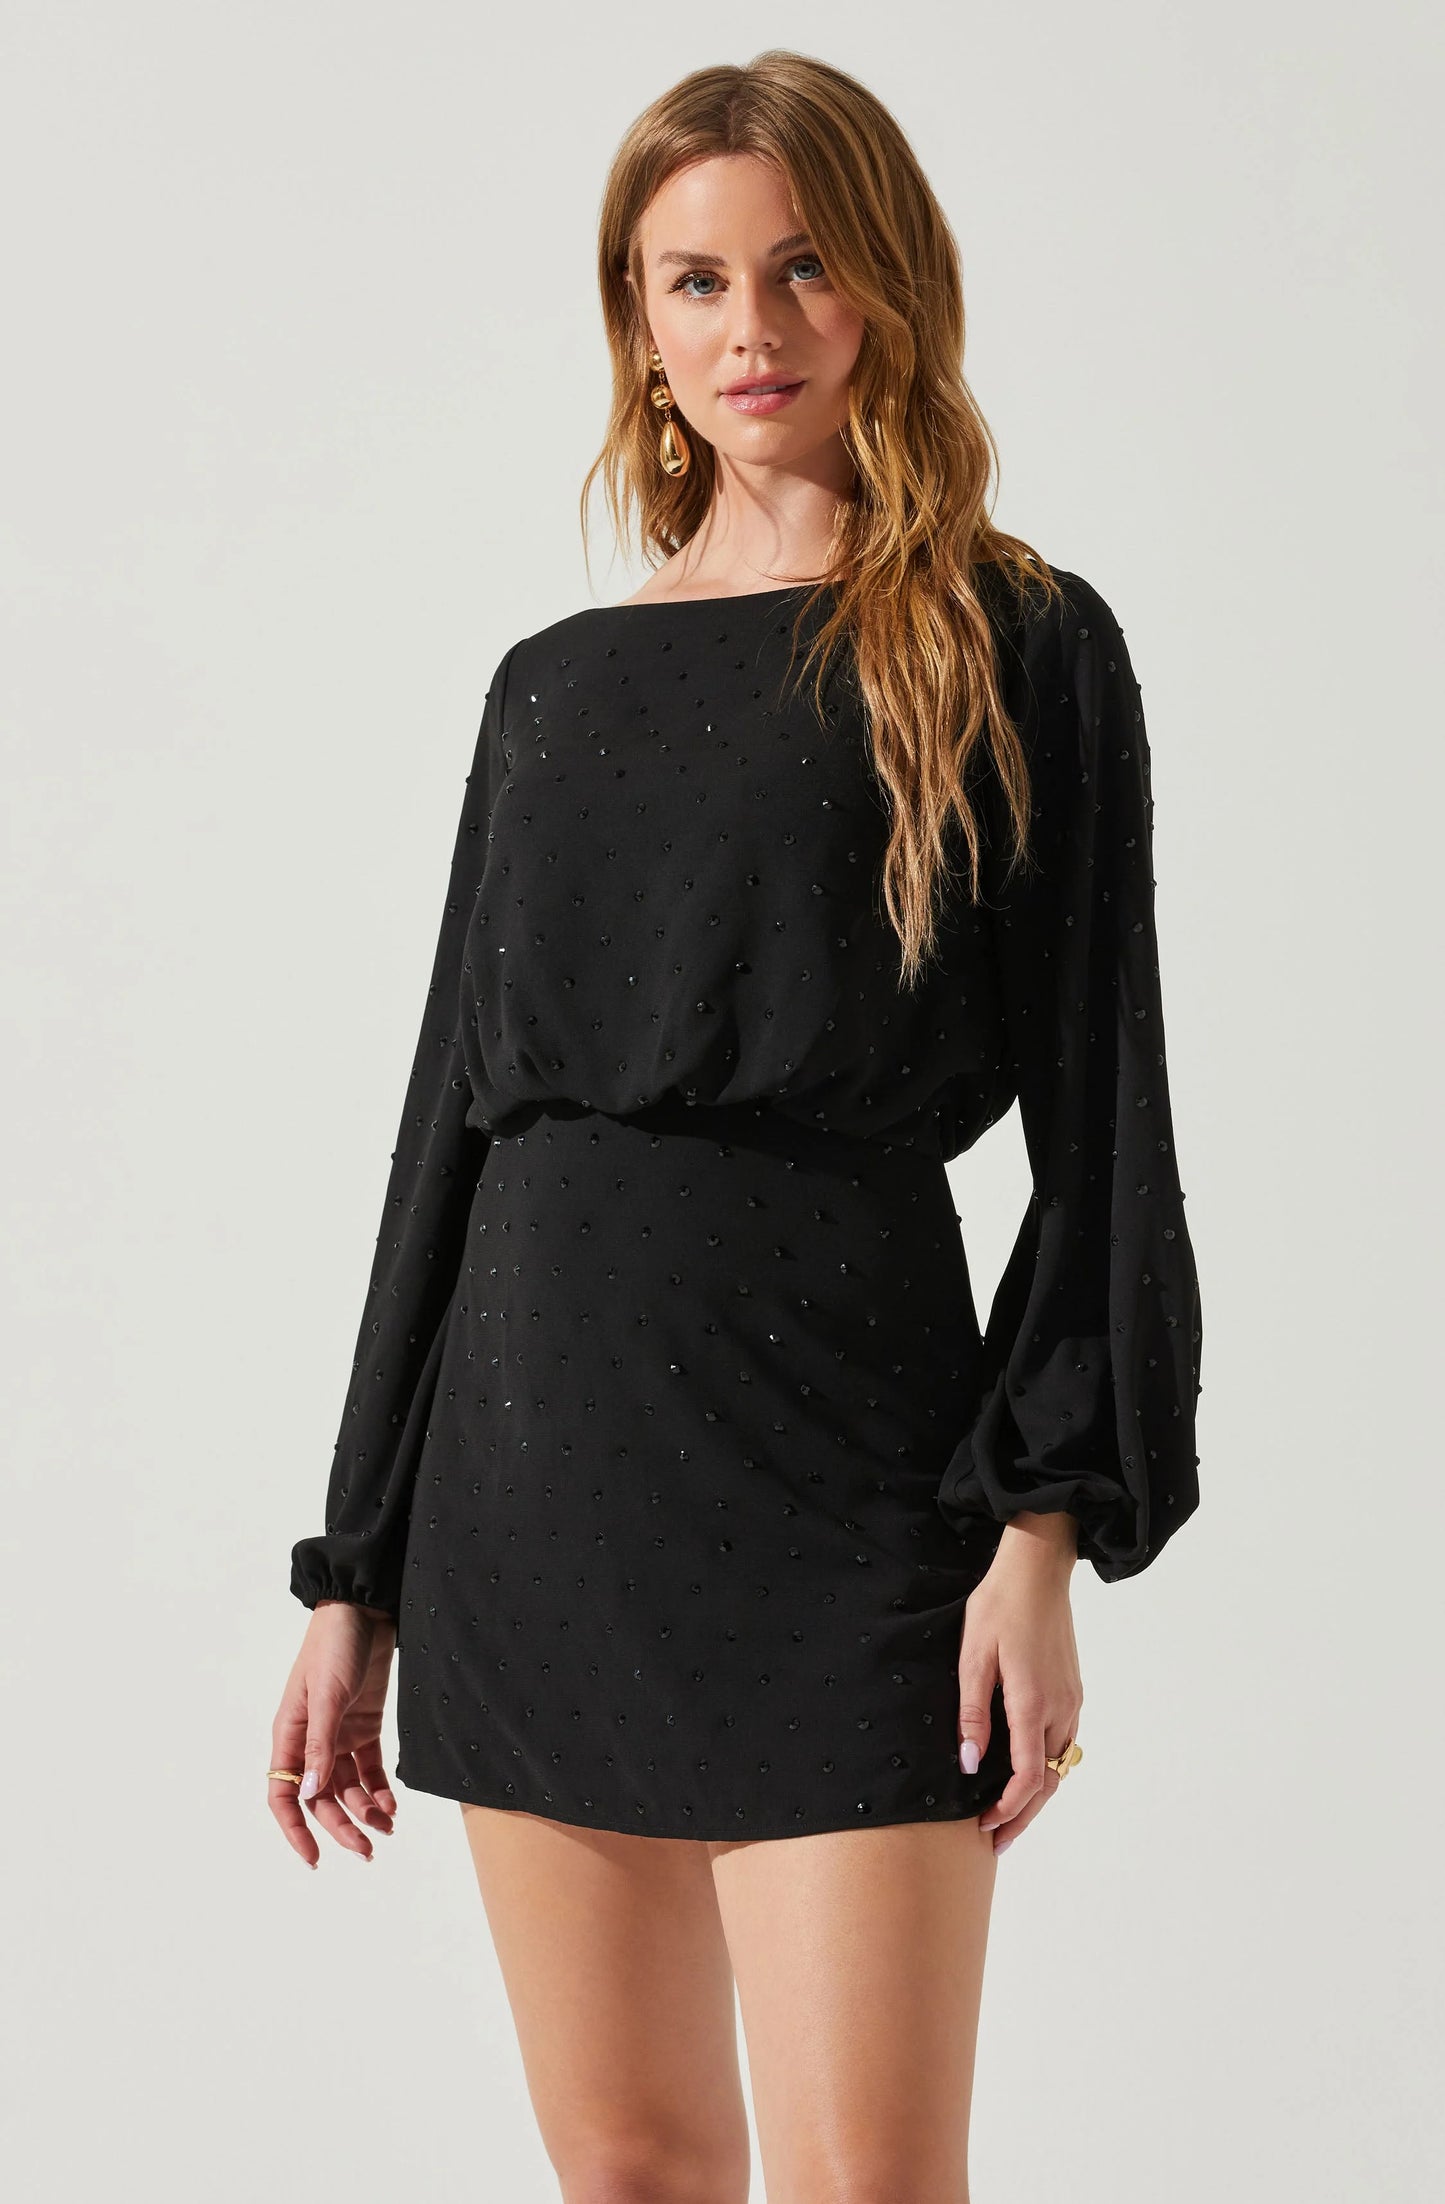 Long Billow Sleeve with Fitted Skirt Mini Dress- Black